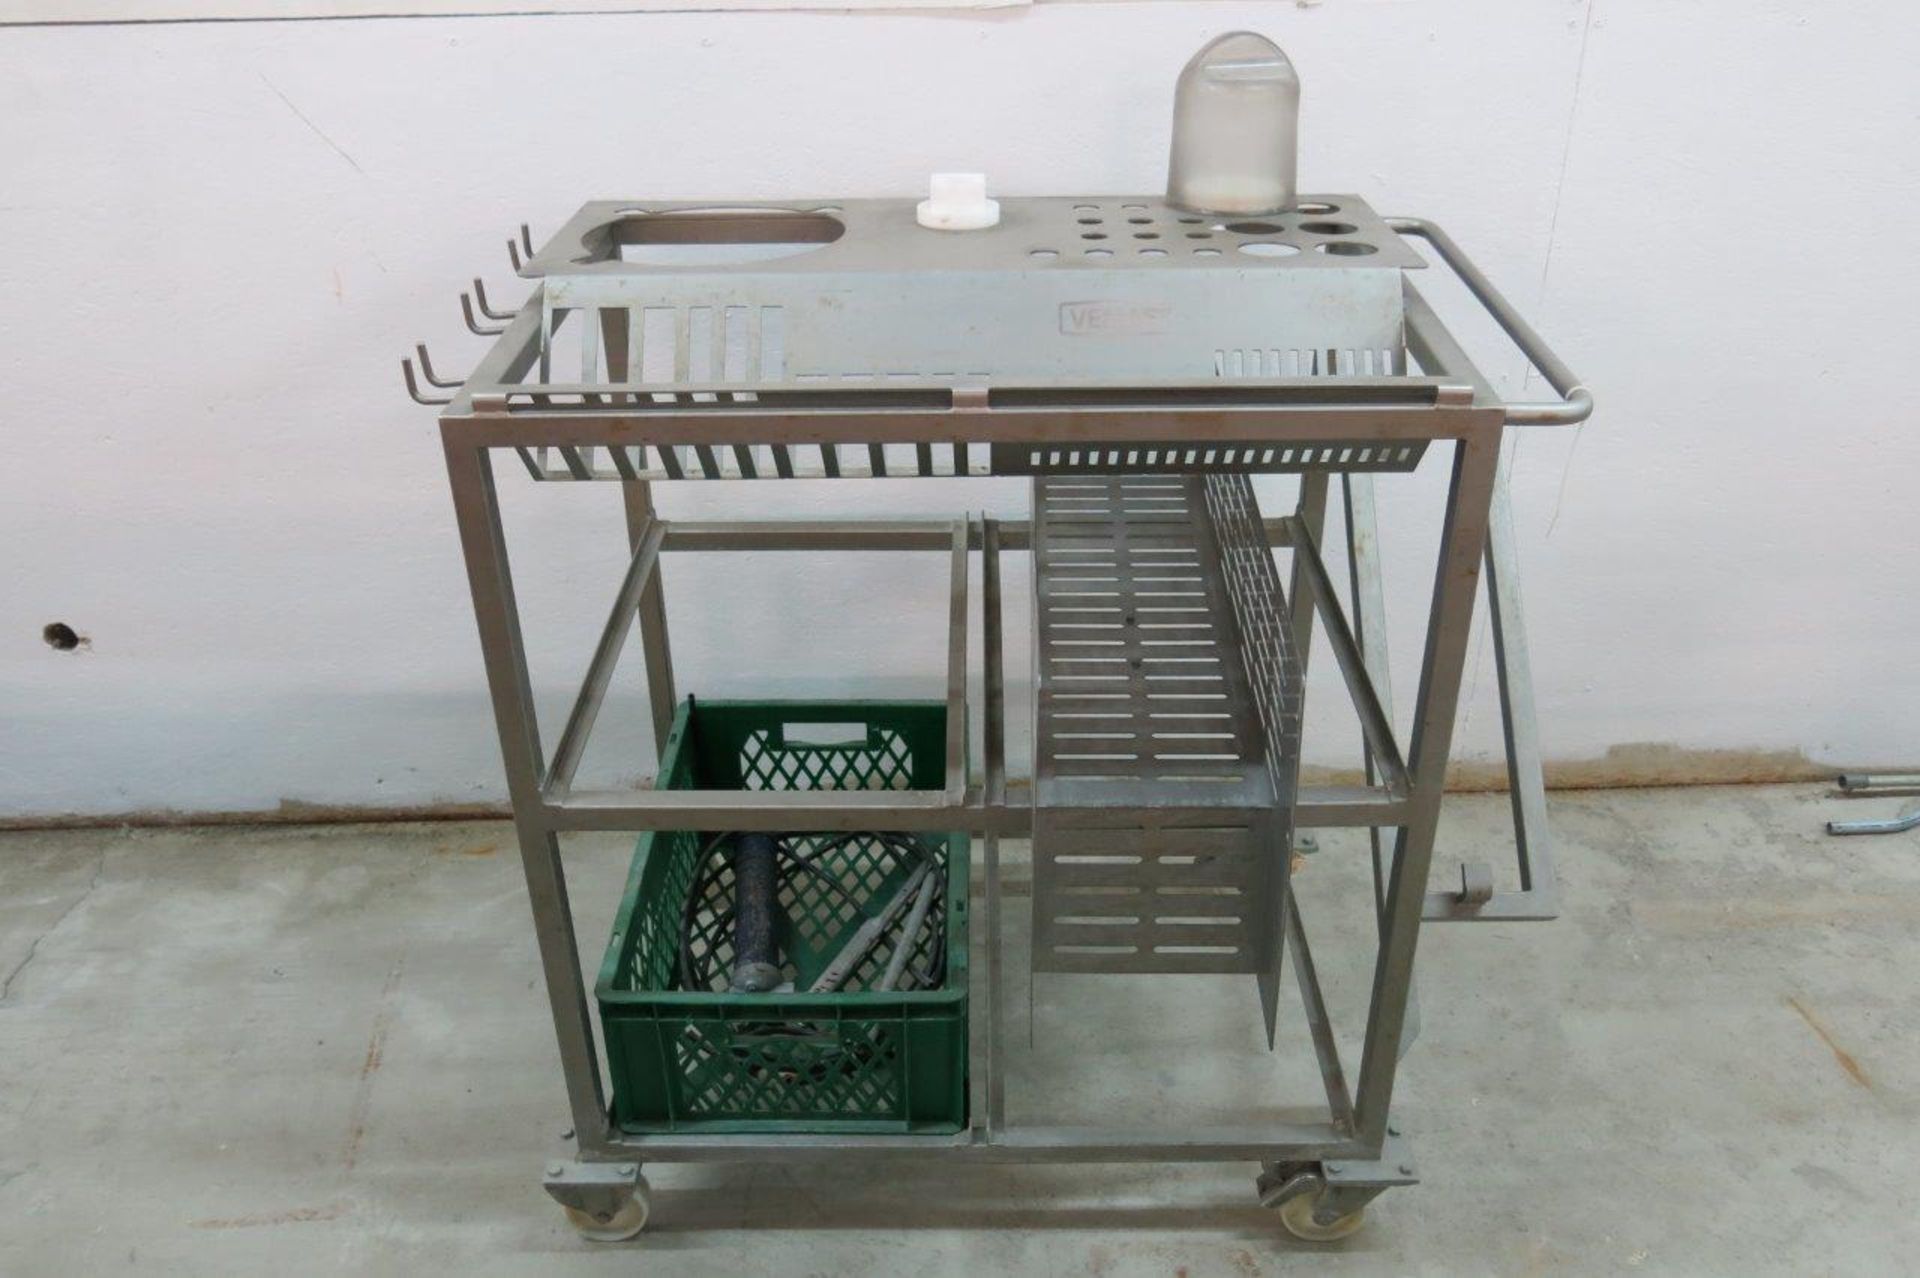 VEMAG PARTS STORAGE CART WITH POLYSCIENCE, 8102A11B, RECICULATION WATER HEATER FOR WATER JACKETS,